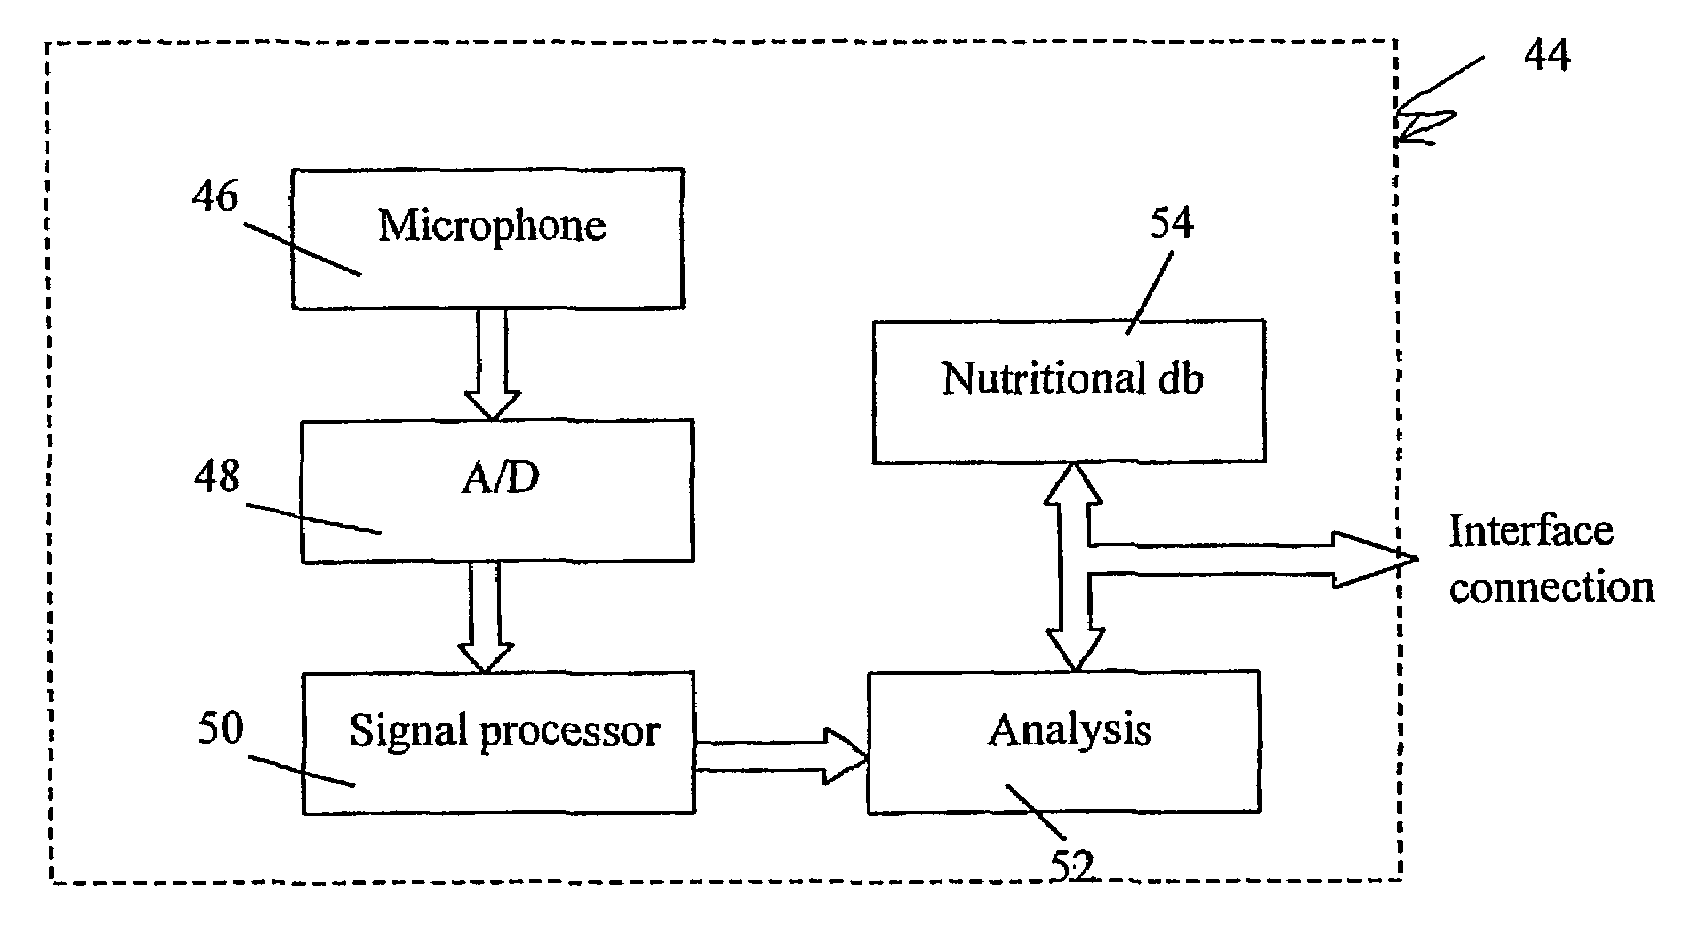 Speech recognition capability for a personal digital assistant